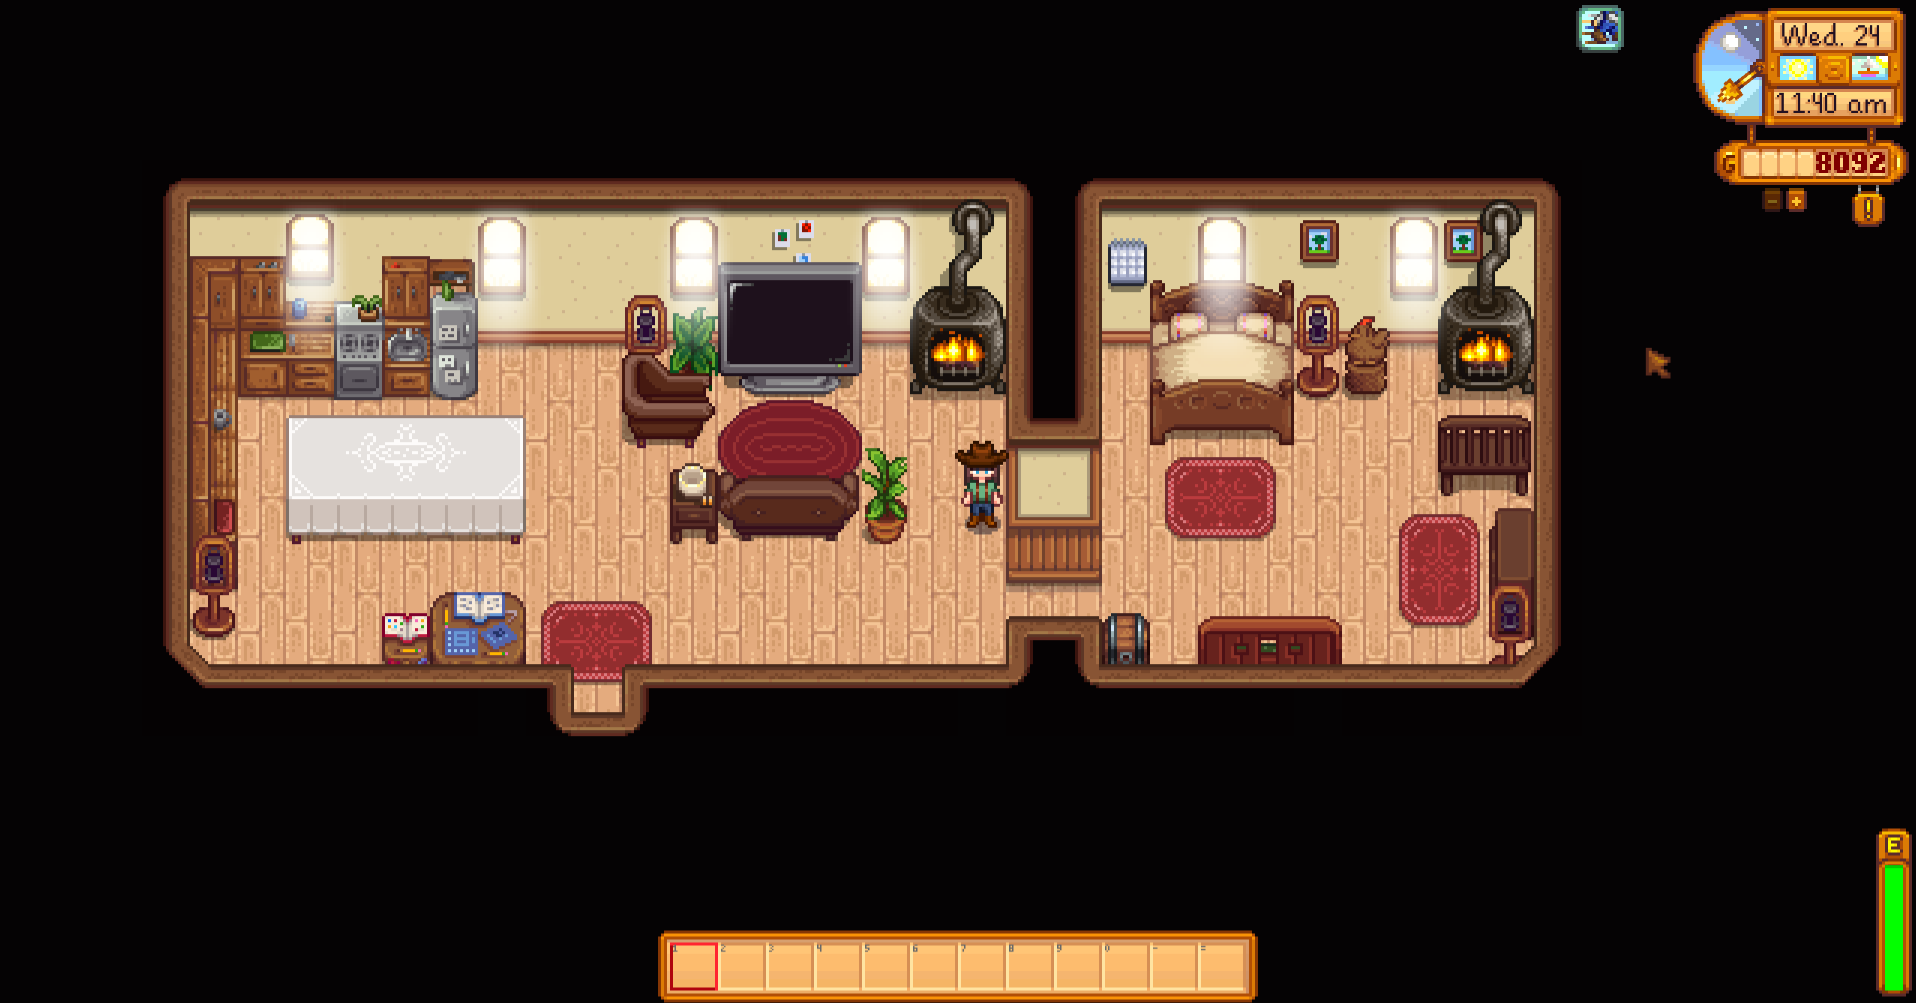 A fully decorated house in Stardew Valley